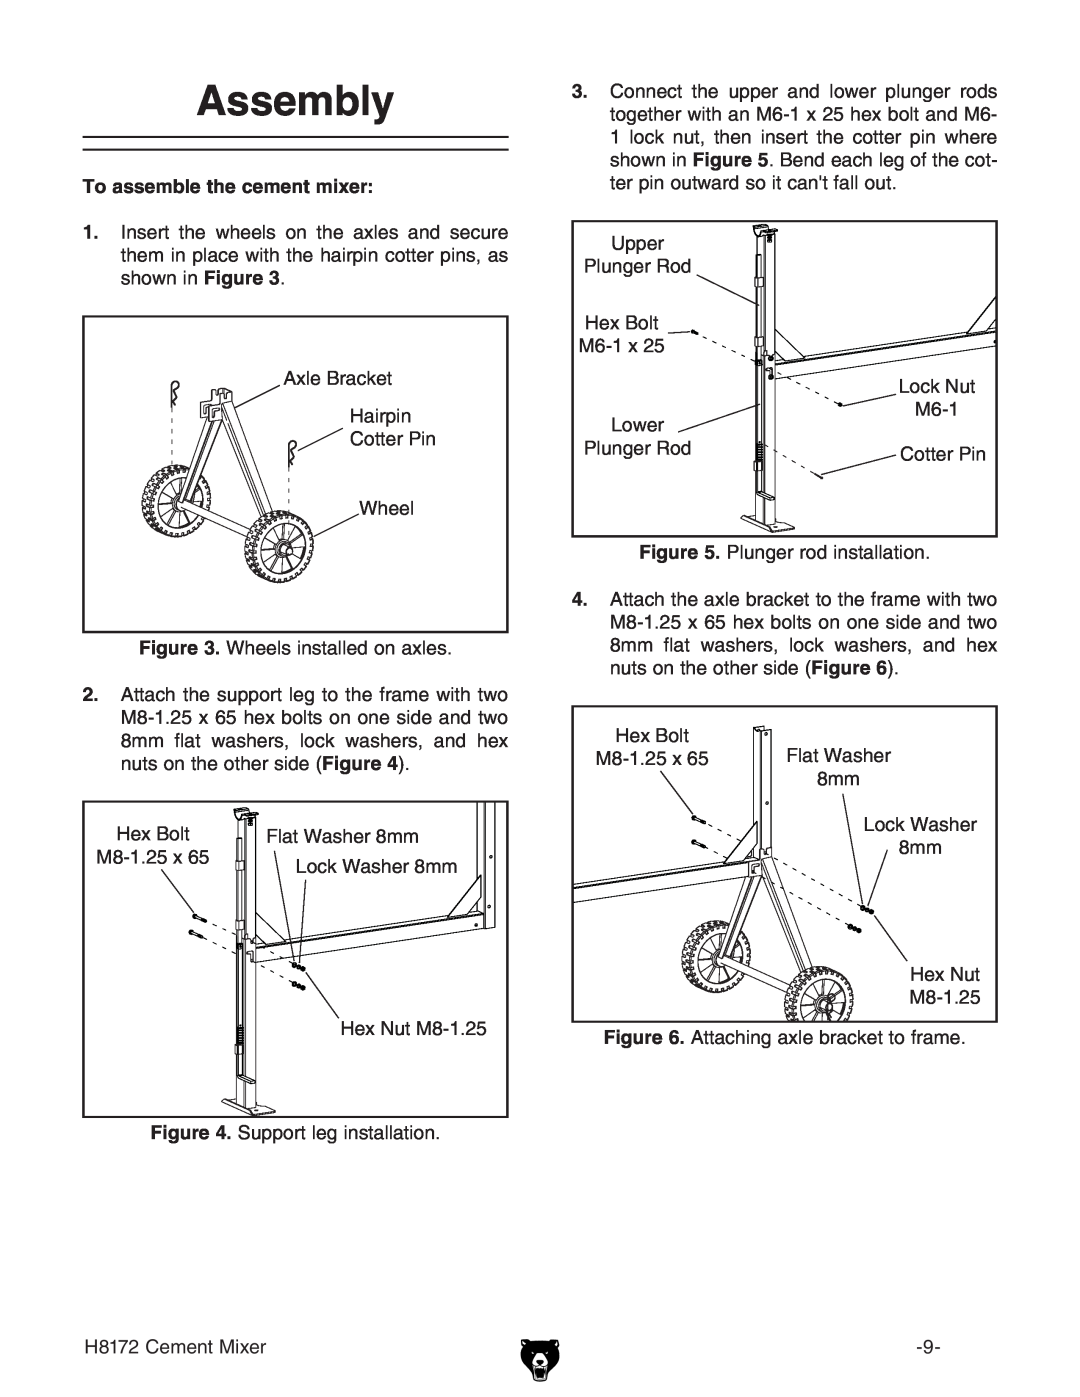 Grizzly H8172 owner manual Assembly, To assemble the cement mixer 